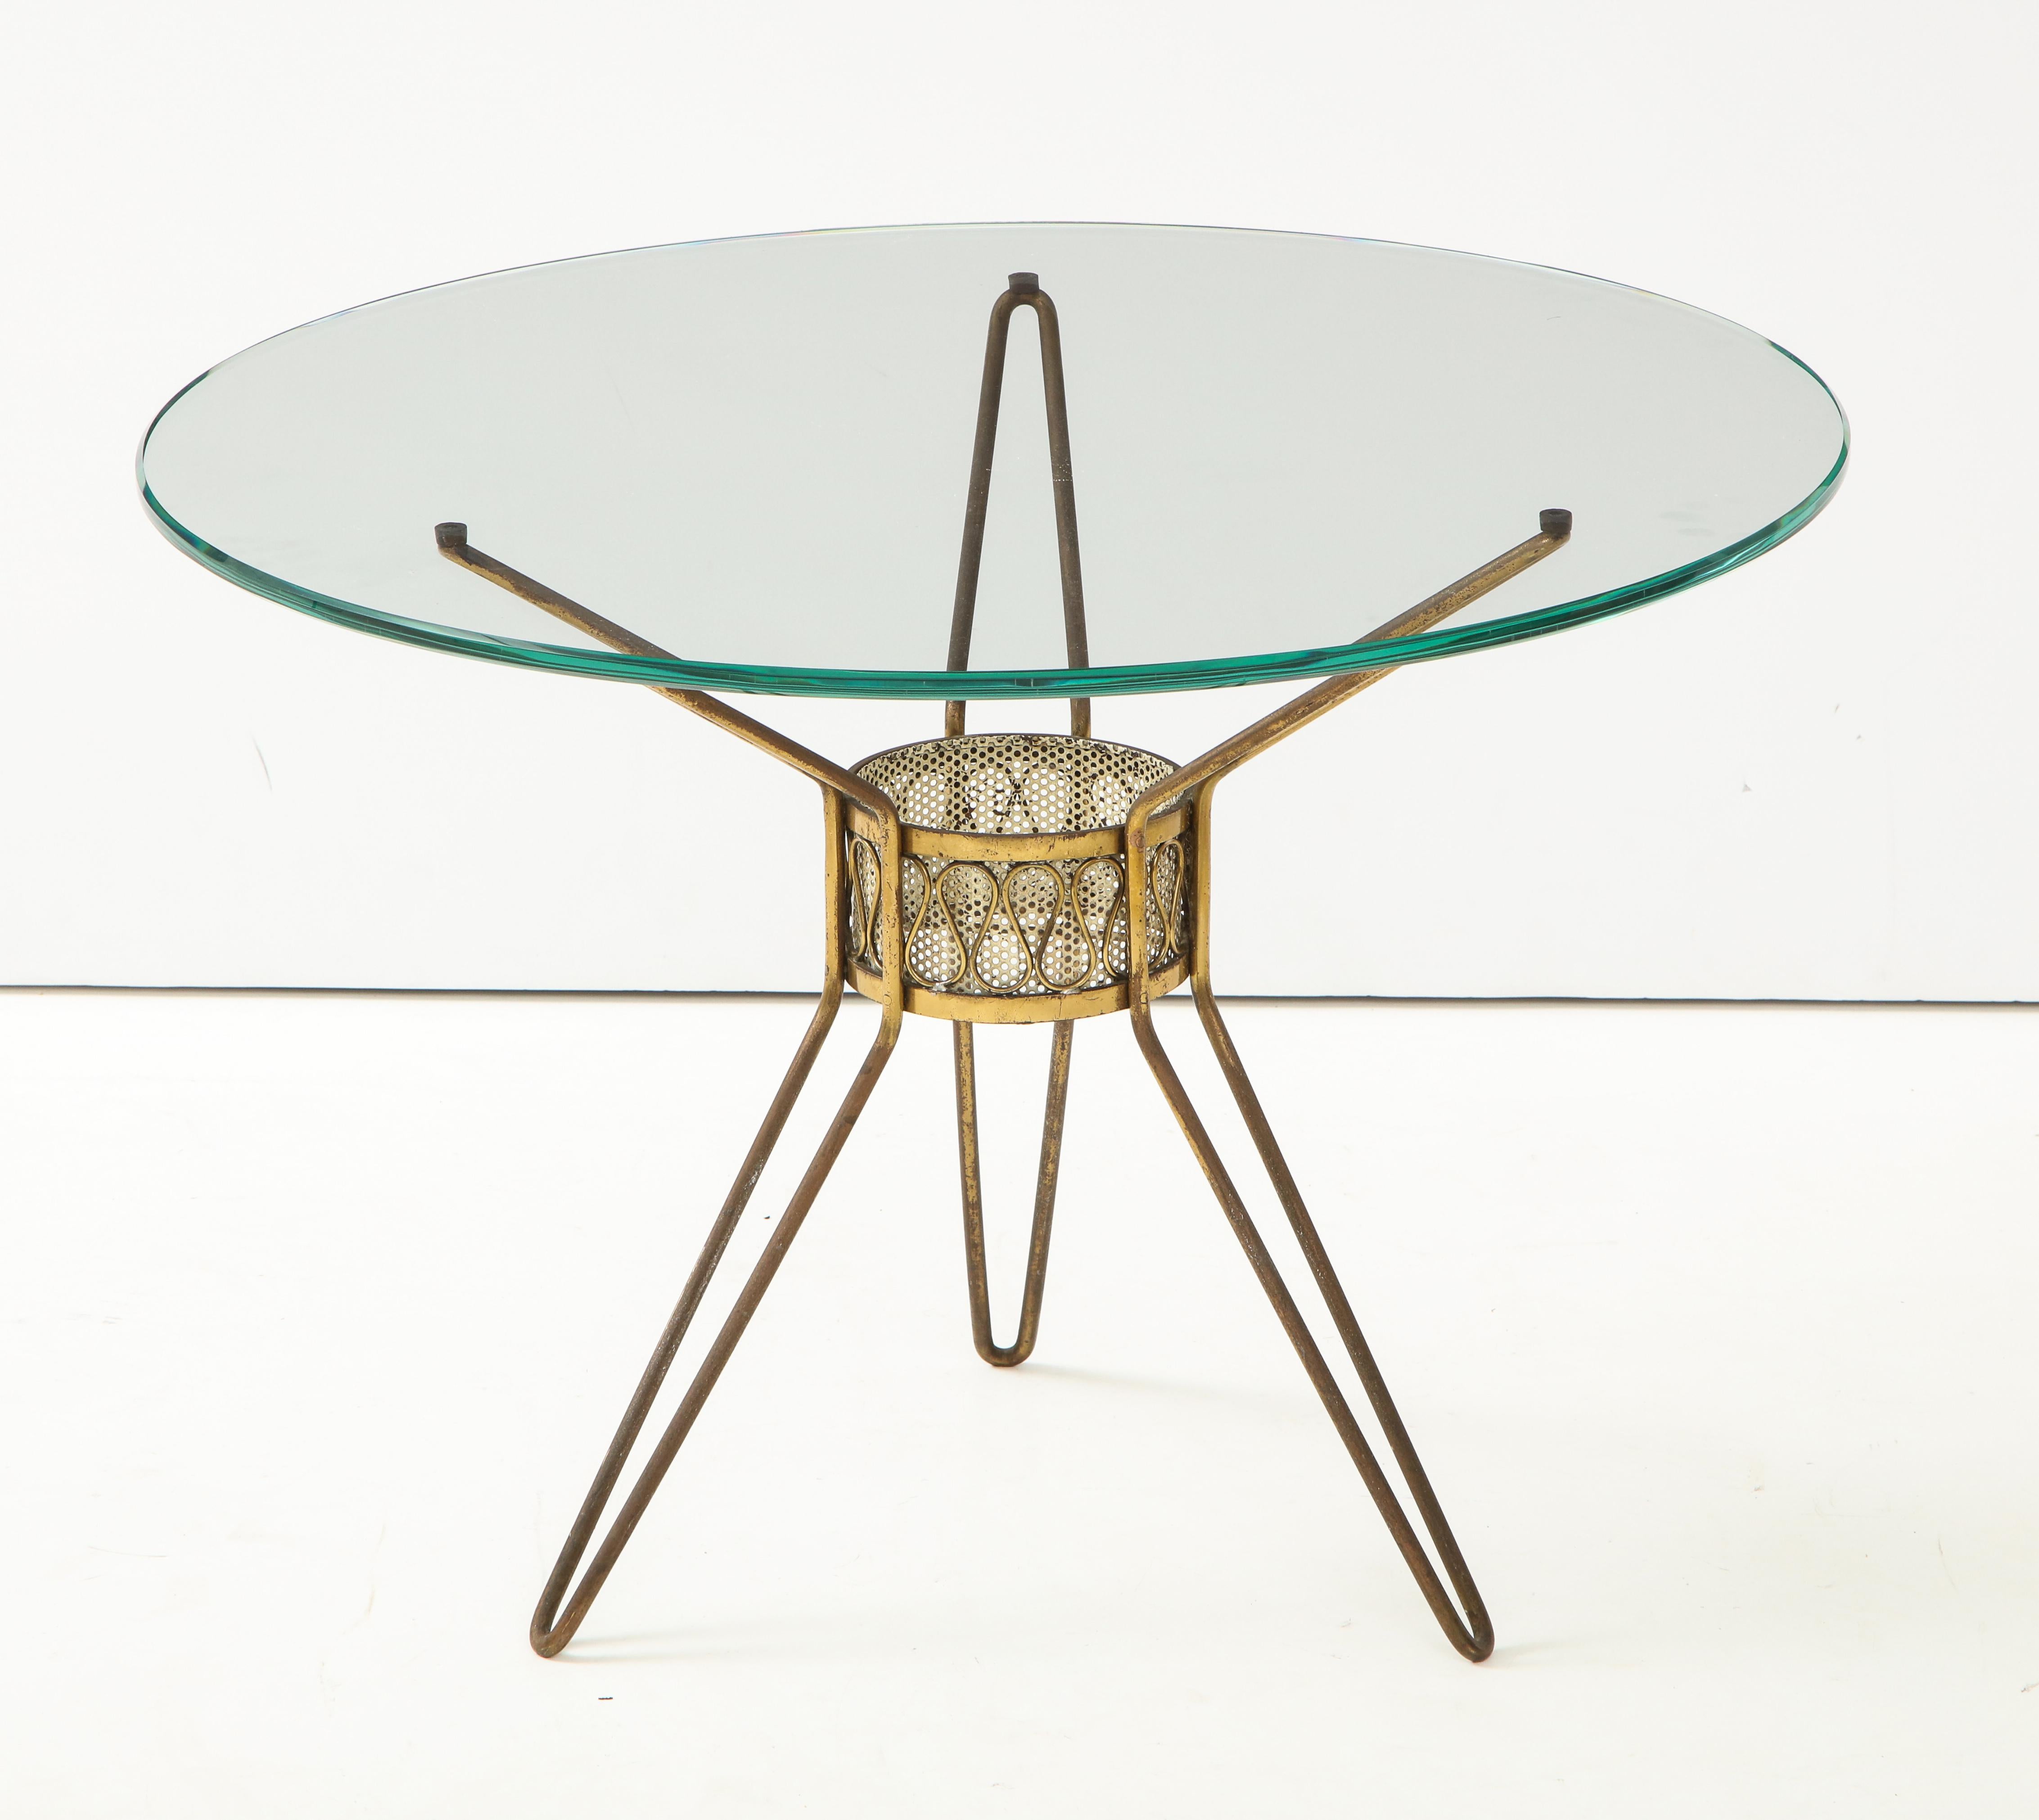 Gio Ponti style occasional tripod table, of the period, Italy, circa 1950s
Small occasion table, Italy, circa 1940s-1950s
Cut crystal top, brass, mesh, white enamel
Measures: Height 20.5, diameter 28 in.